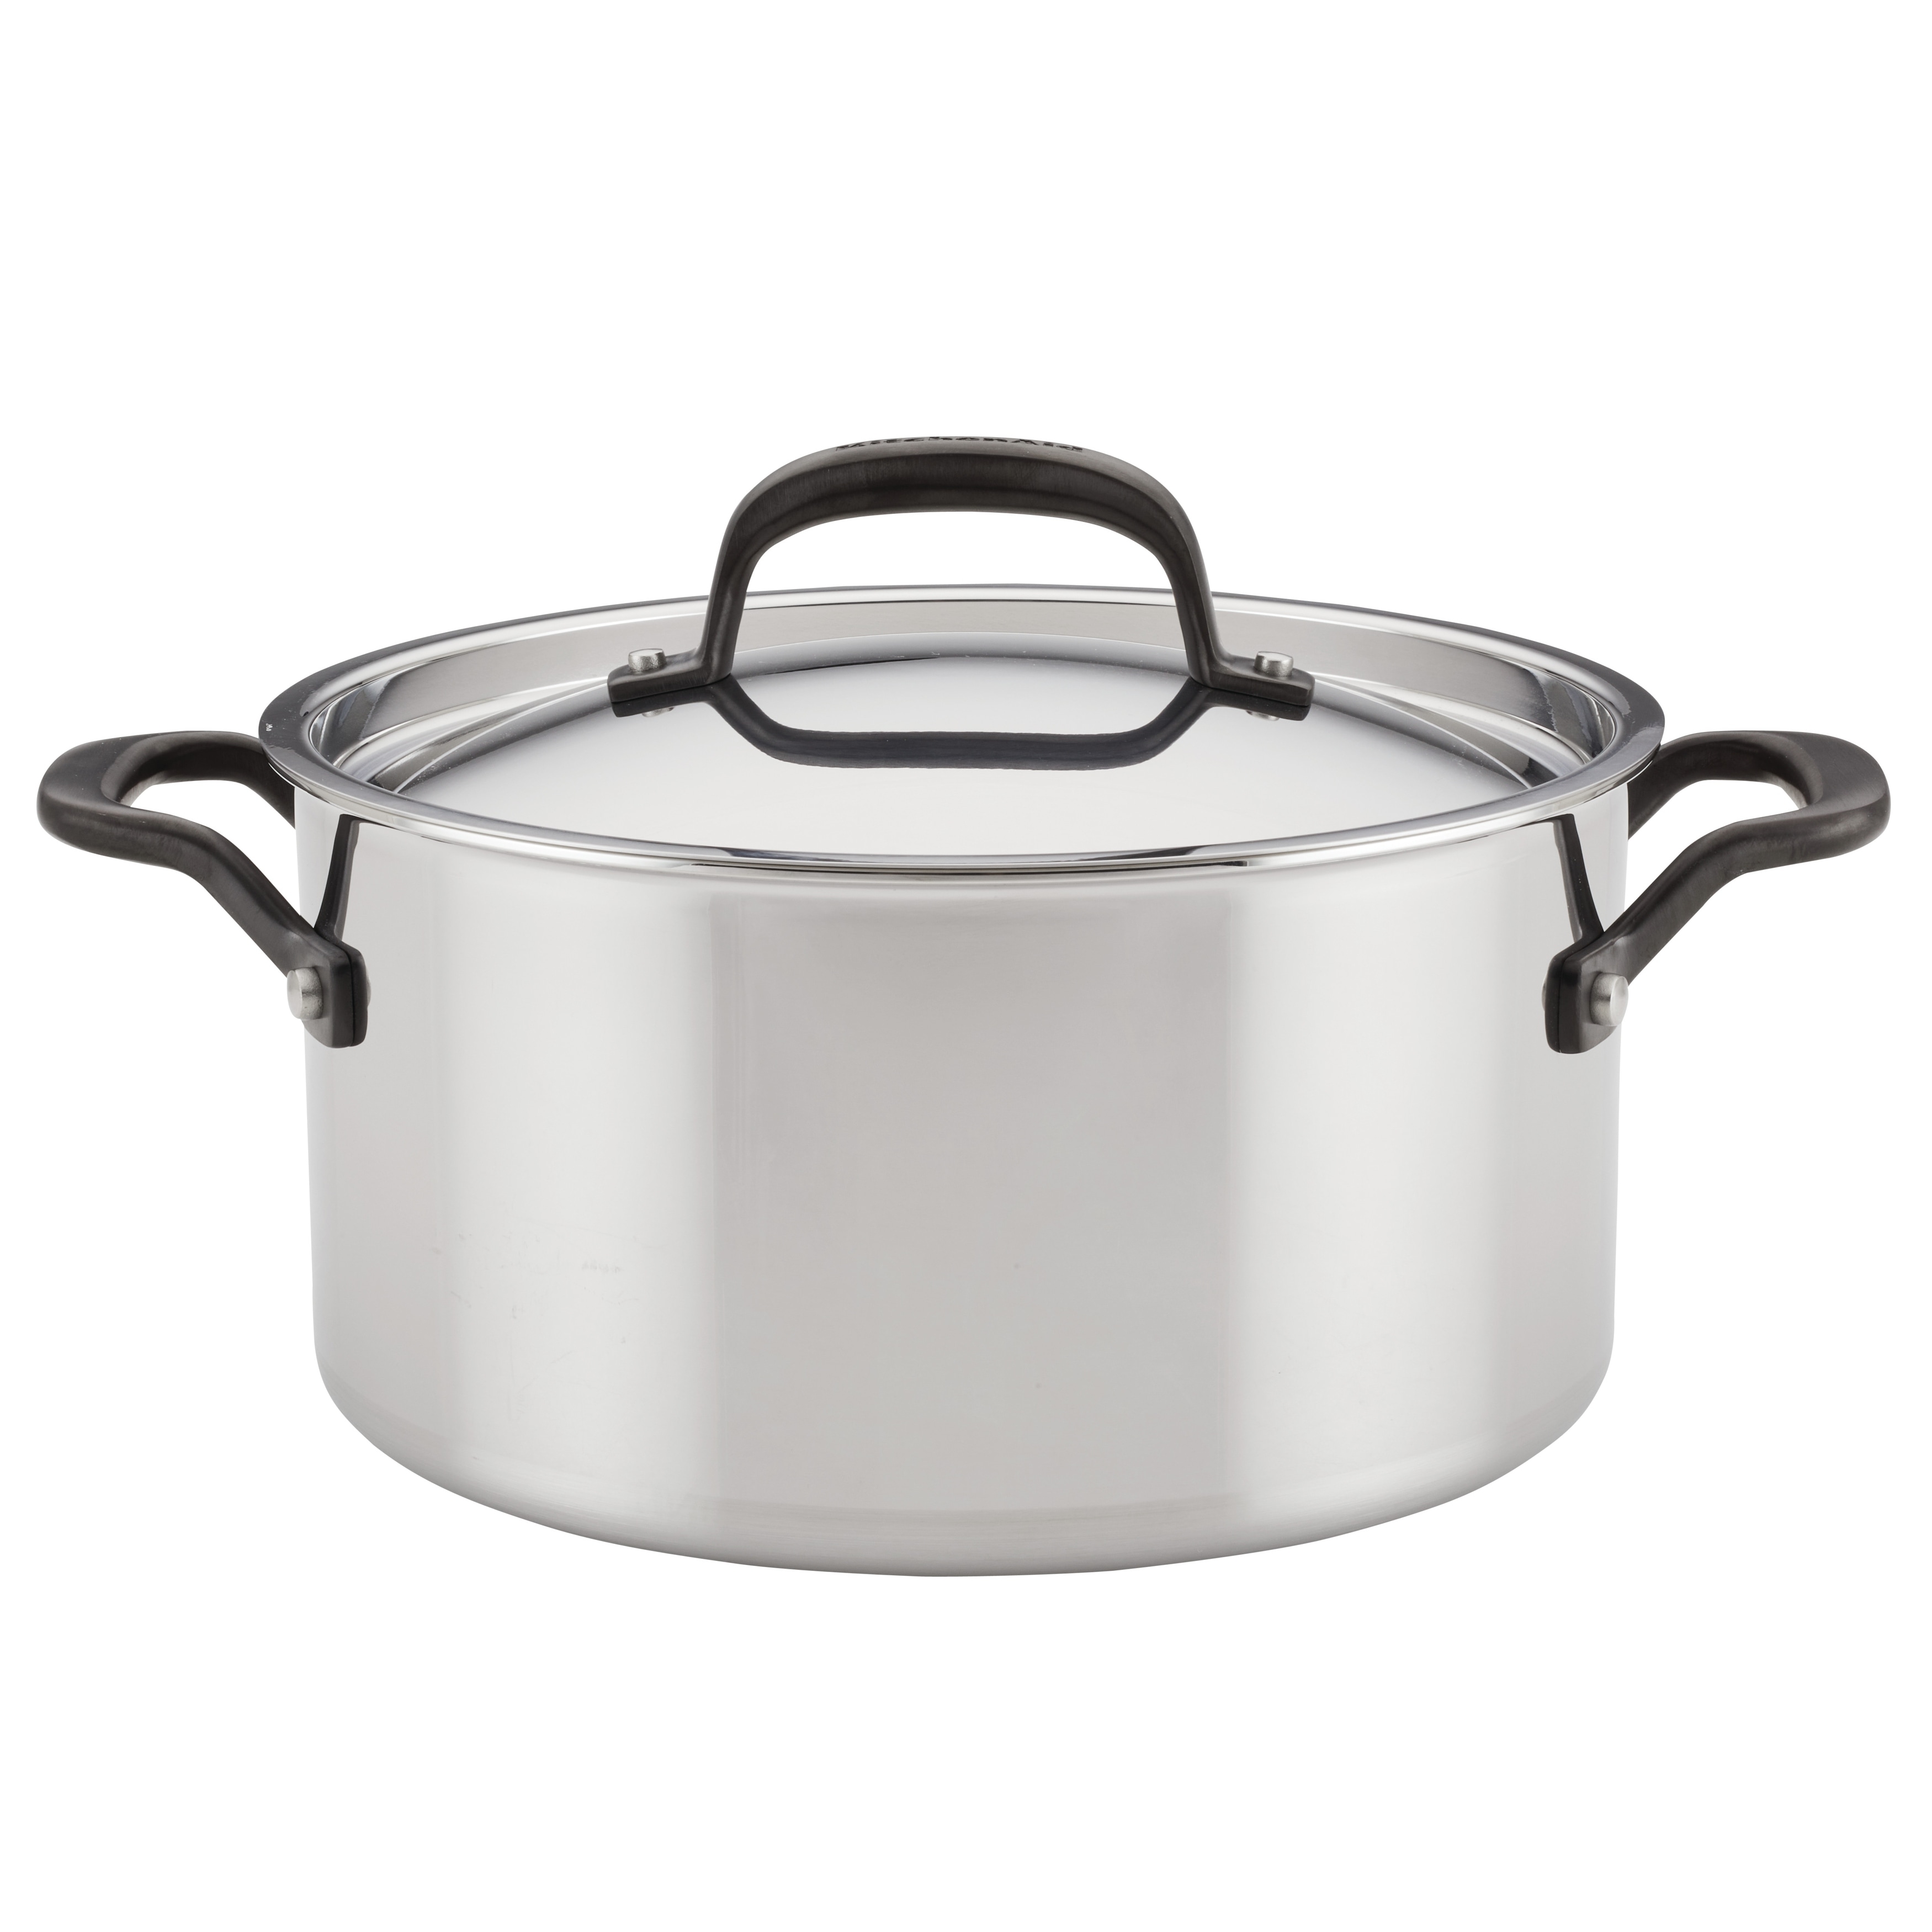 KitchenAid 5-Ply Clad Stainless Steel Induction Stockpot with Lid